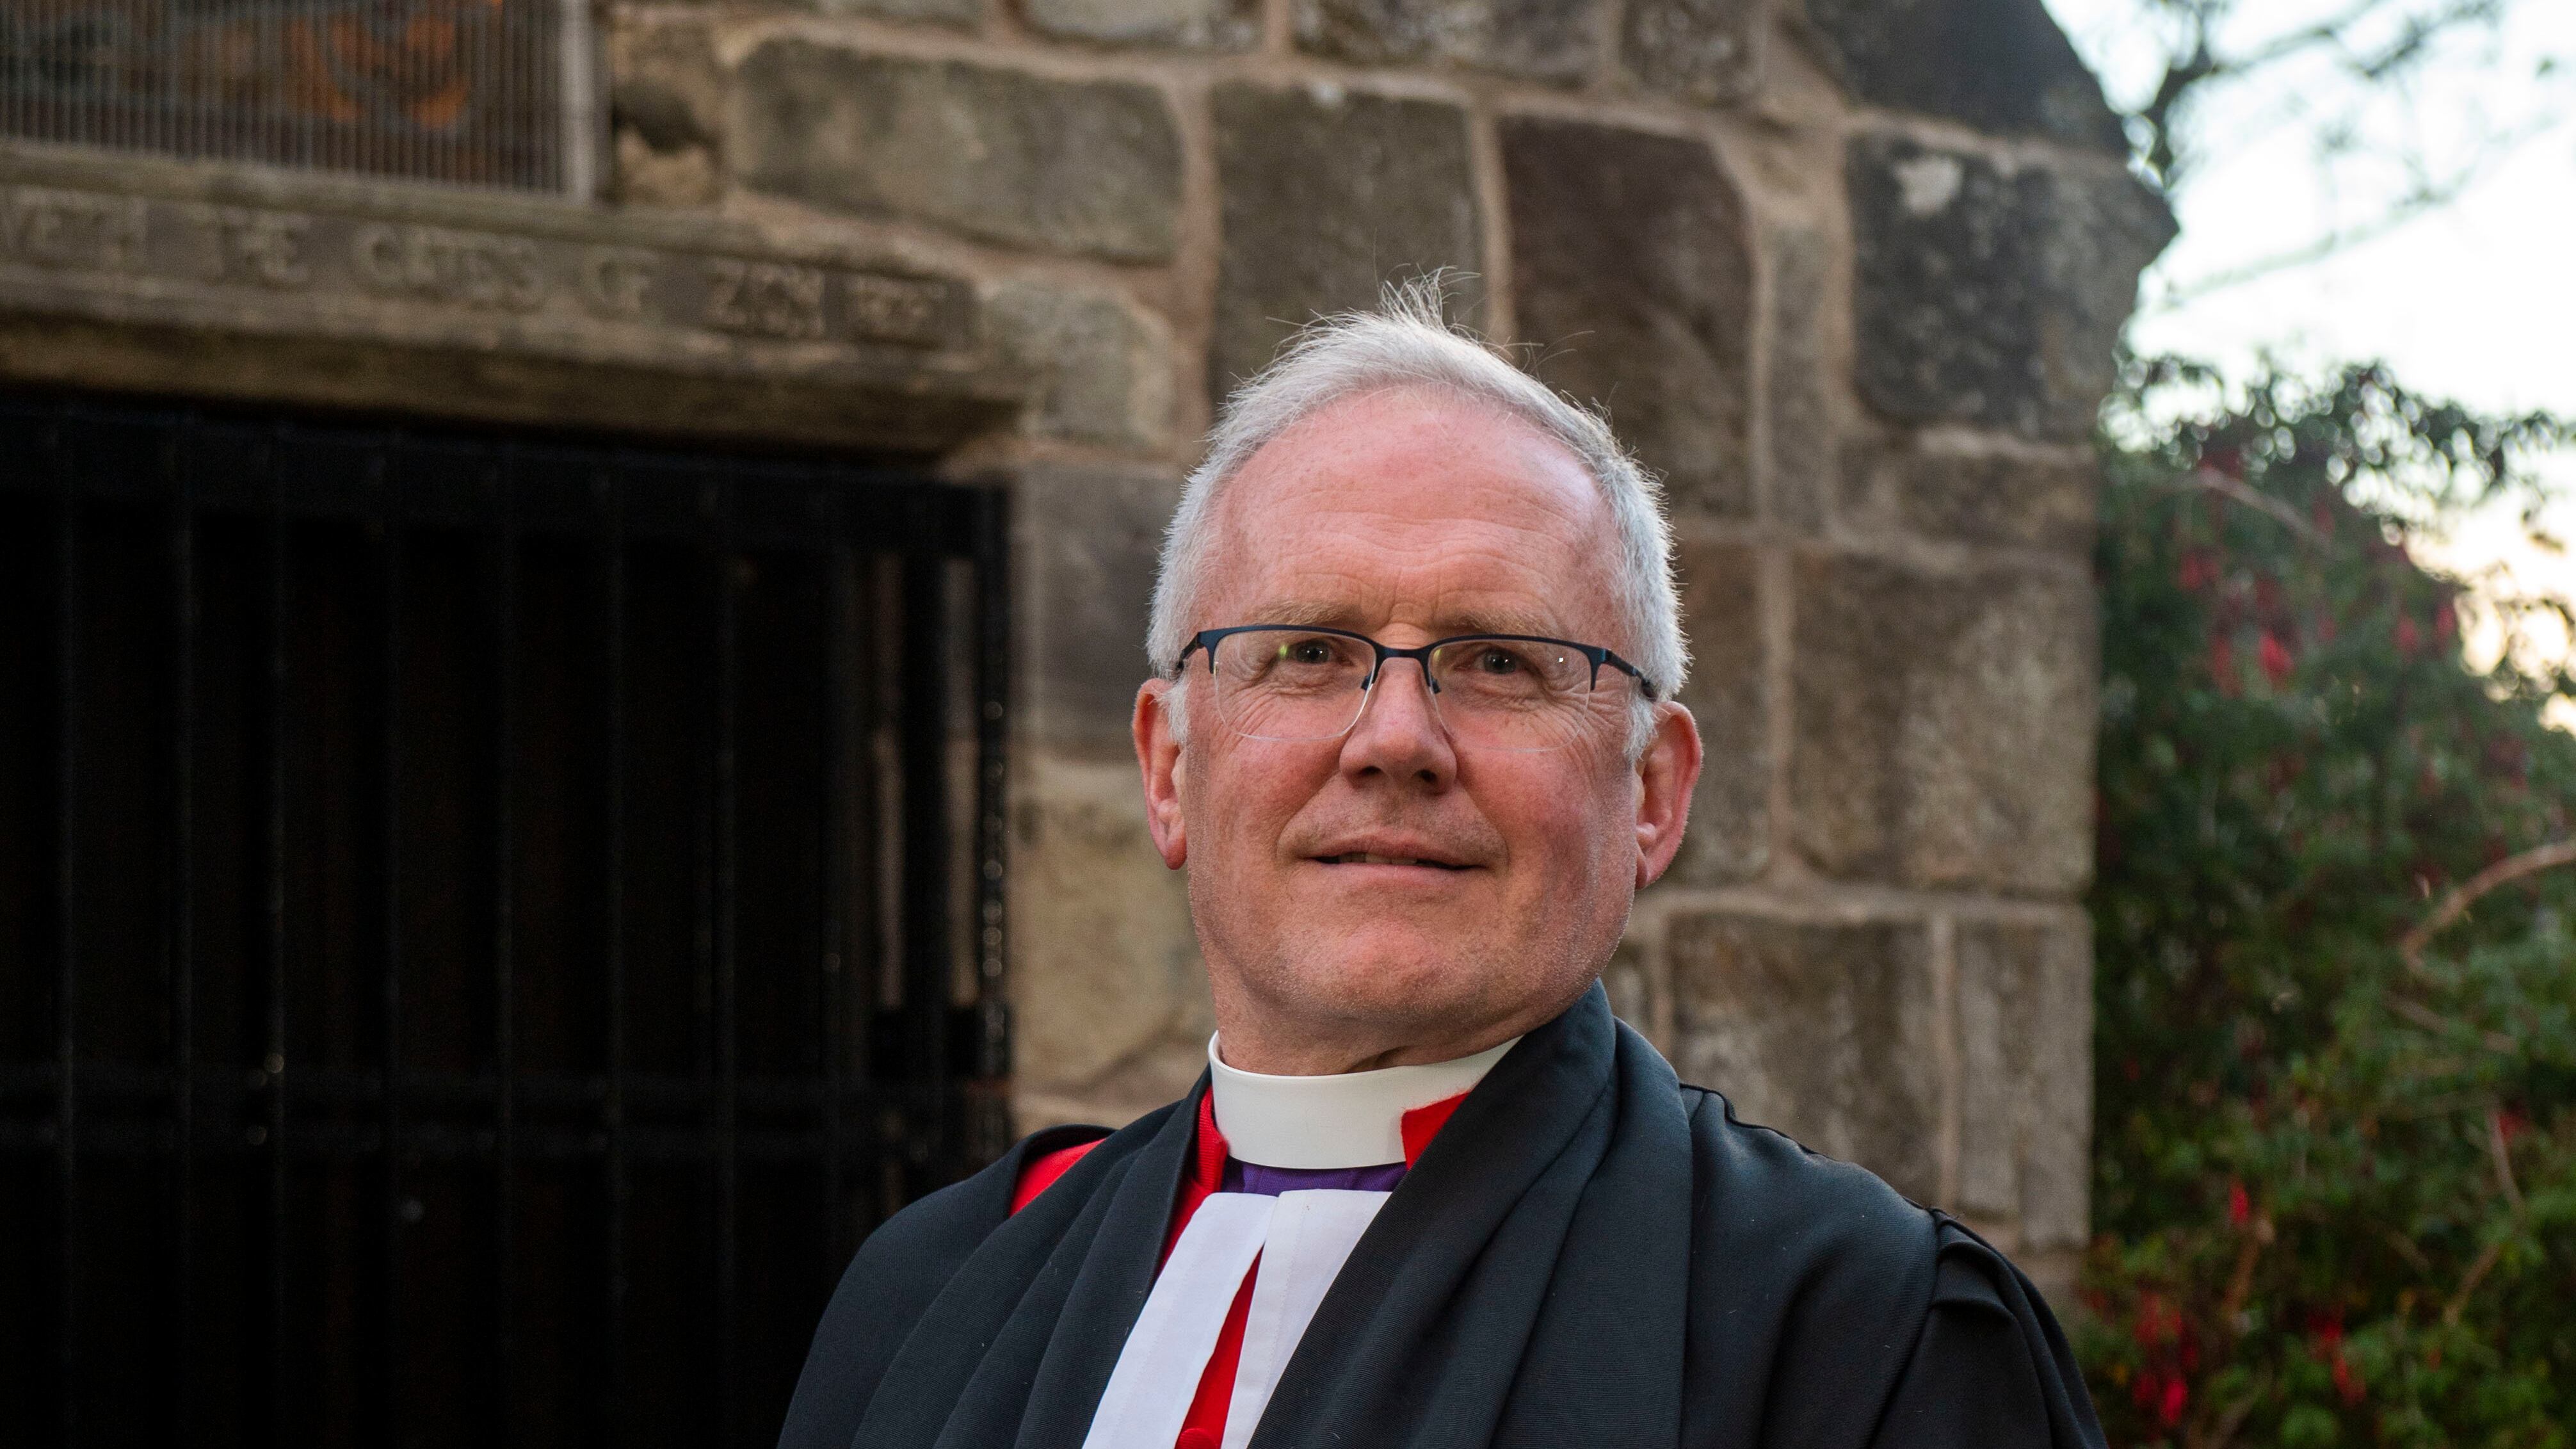 Reverend Kenneth MacKenzie is a member of the Chapel Royal